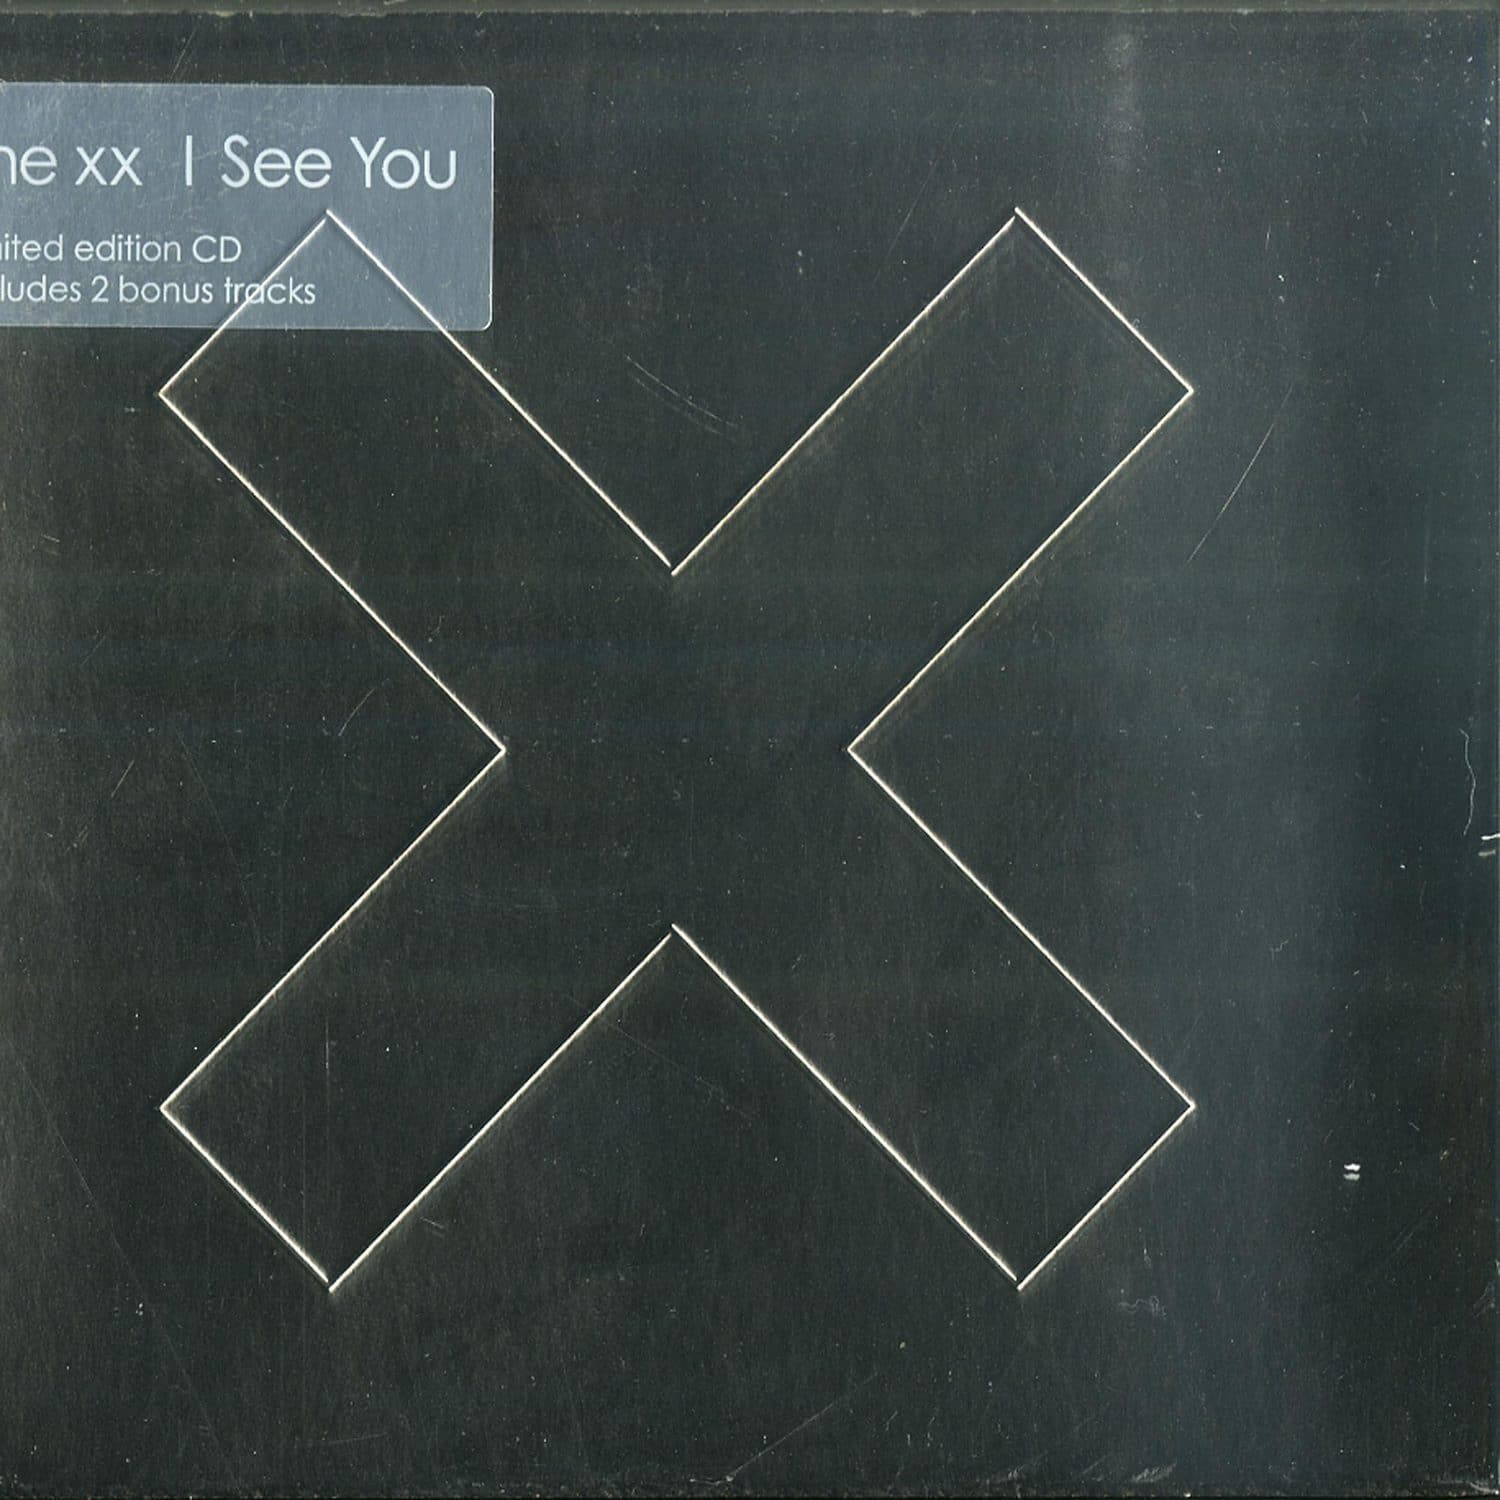 The XX - I SEE YOU 